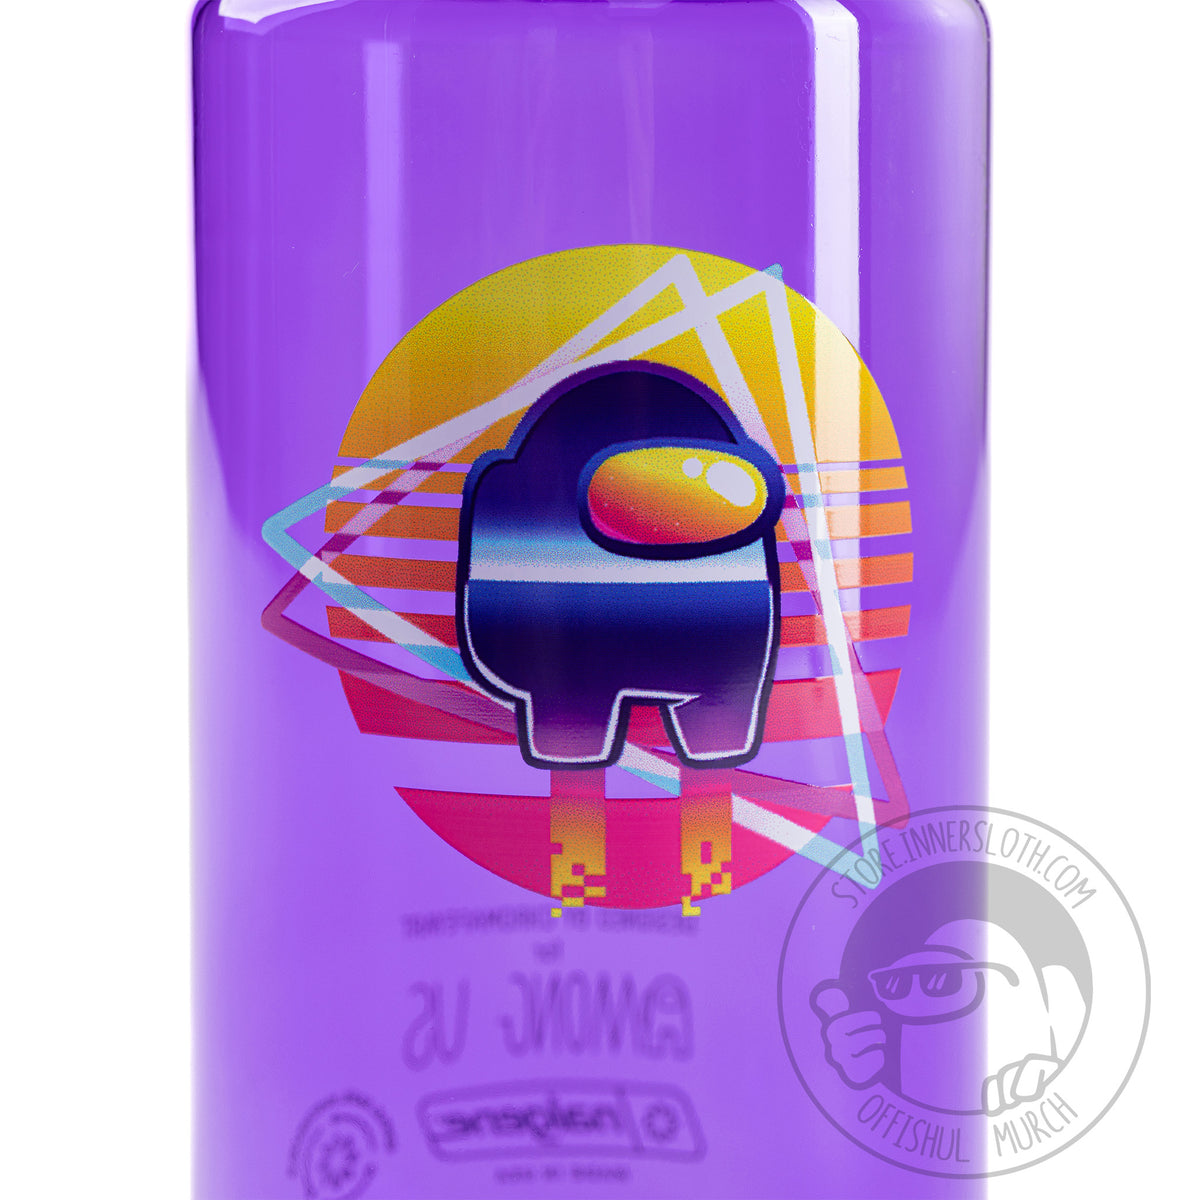  A close up and zoomed in photo of the Vaporwave Crewmate decal on the waterbottle. 